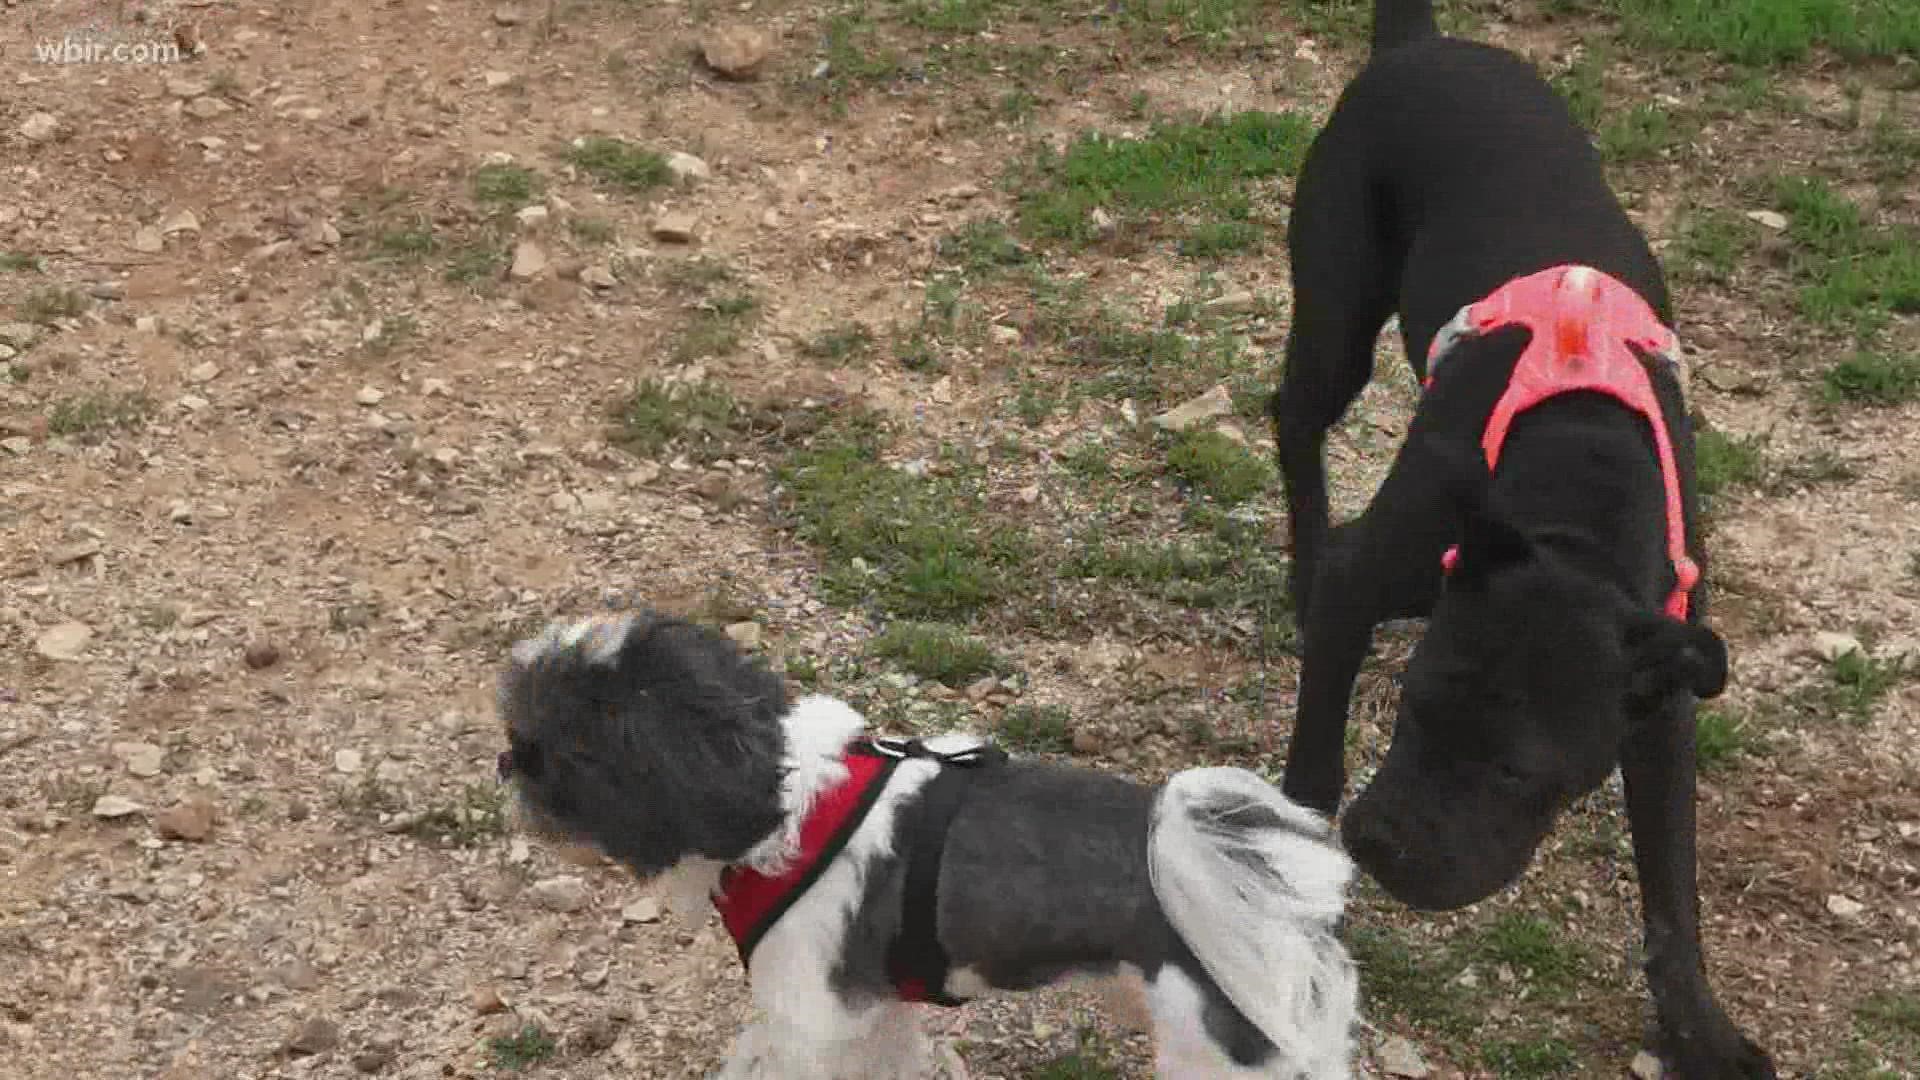 More and more young people are choosing to be pet parents. We went to the dog park to find out why.